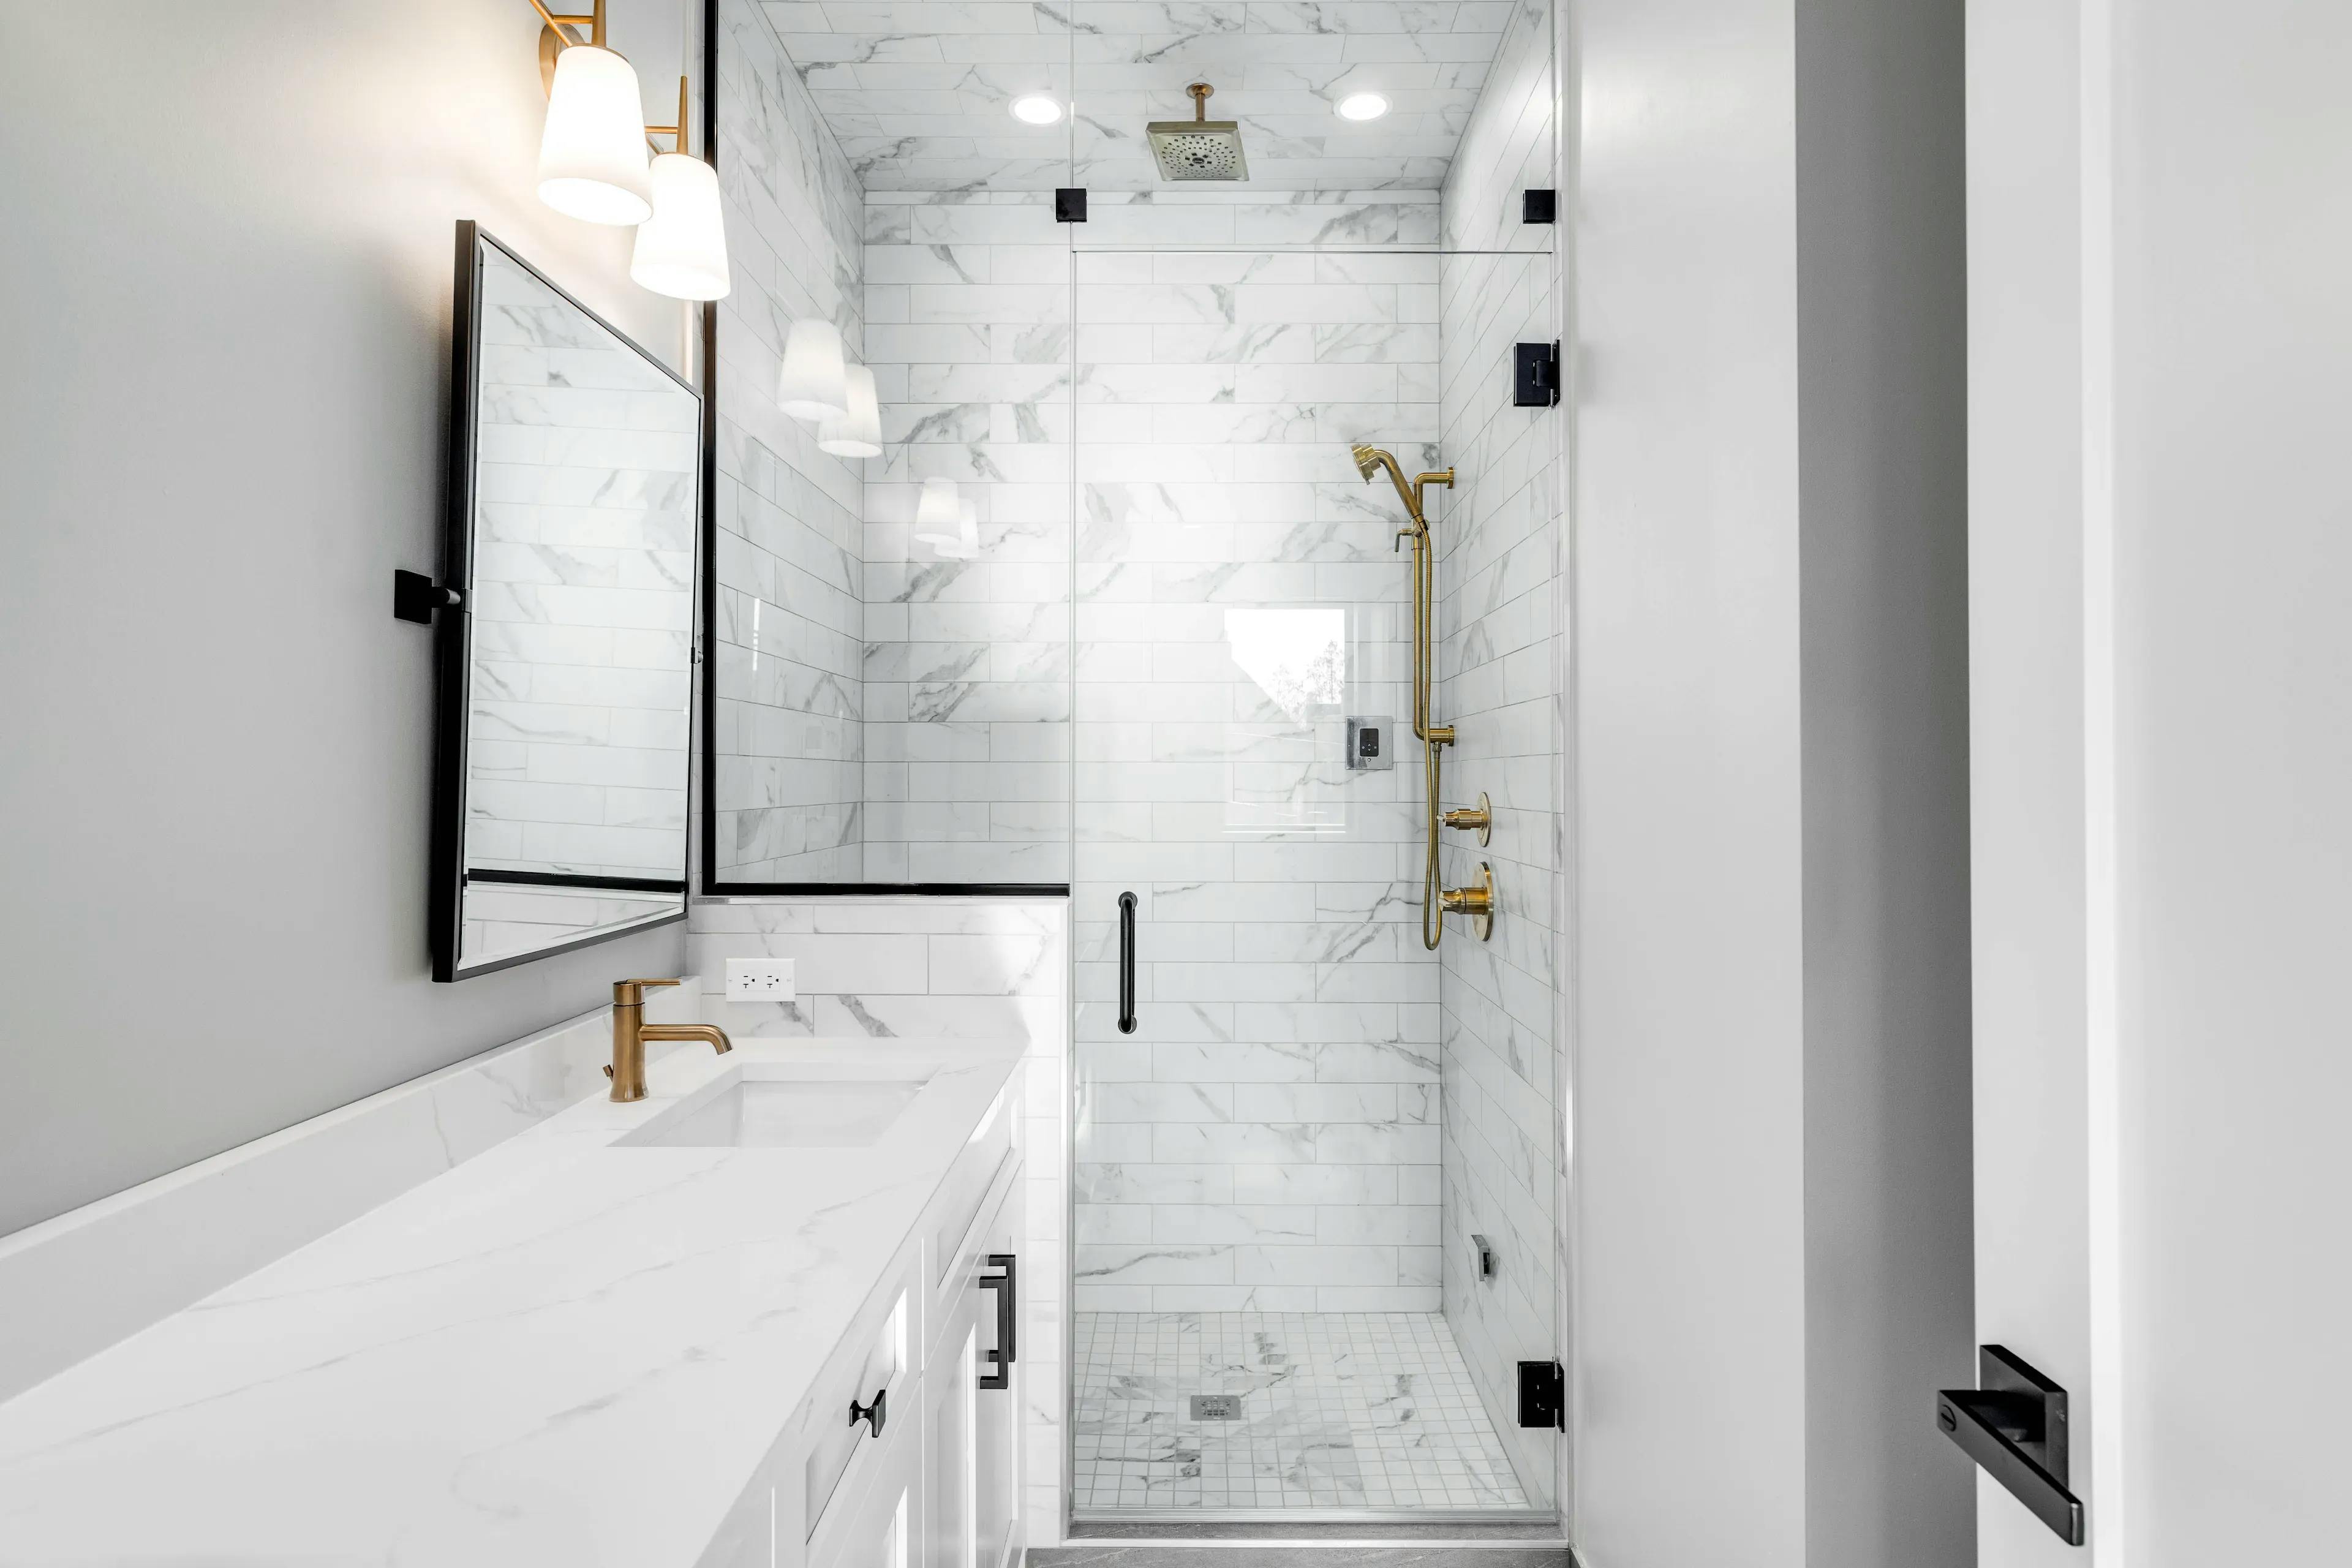 Small bathroom setting with glass shower doors. On one side, there's a sink and a rectangle mirror against white walls